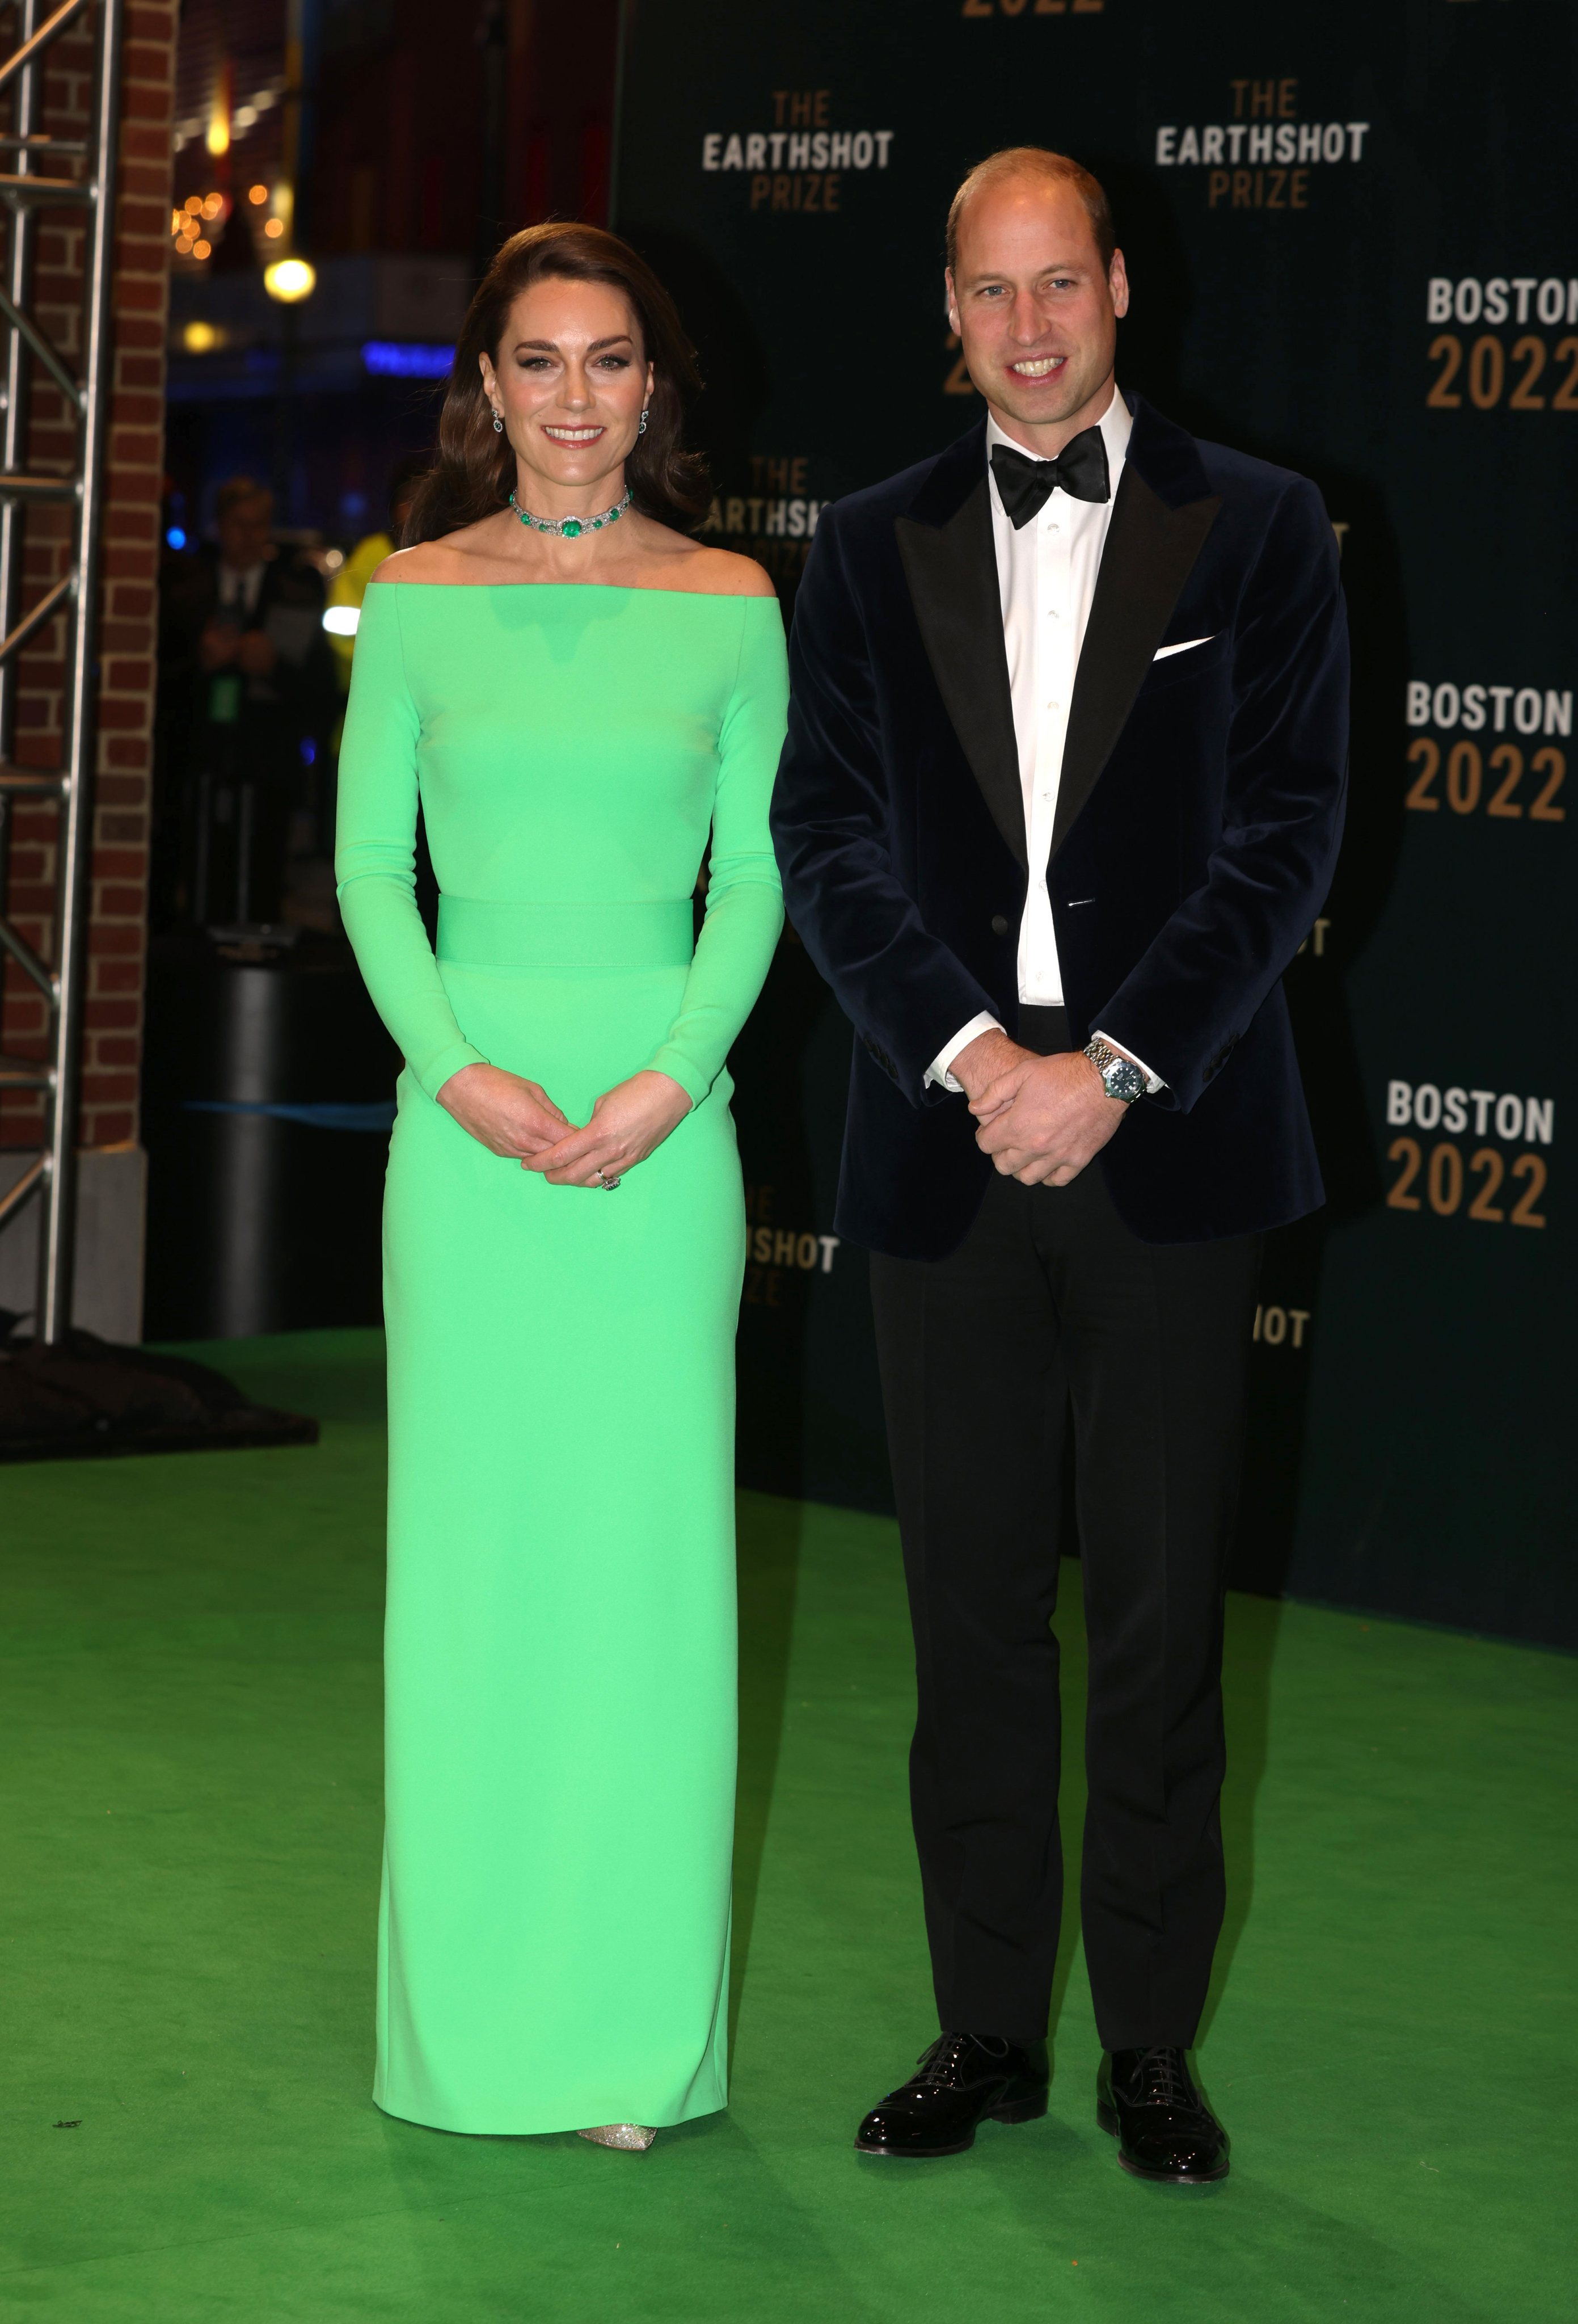 The Prince And Princess Of Wales Visit Boston - Day 3